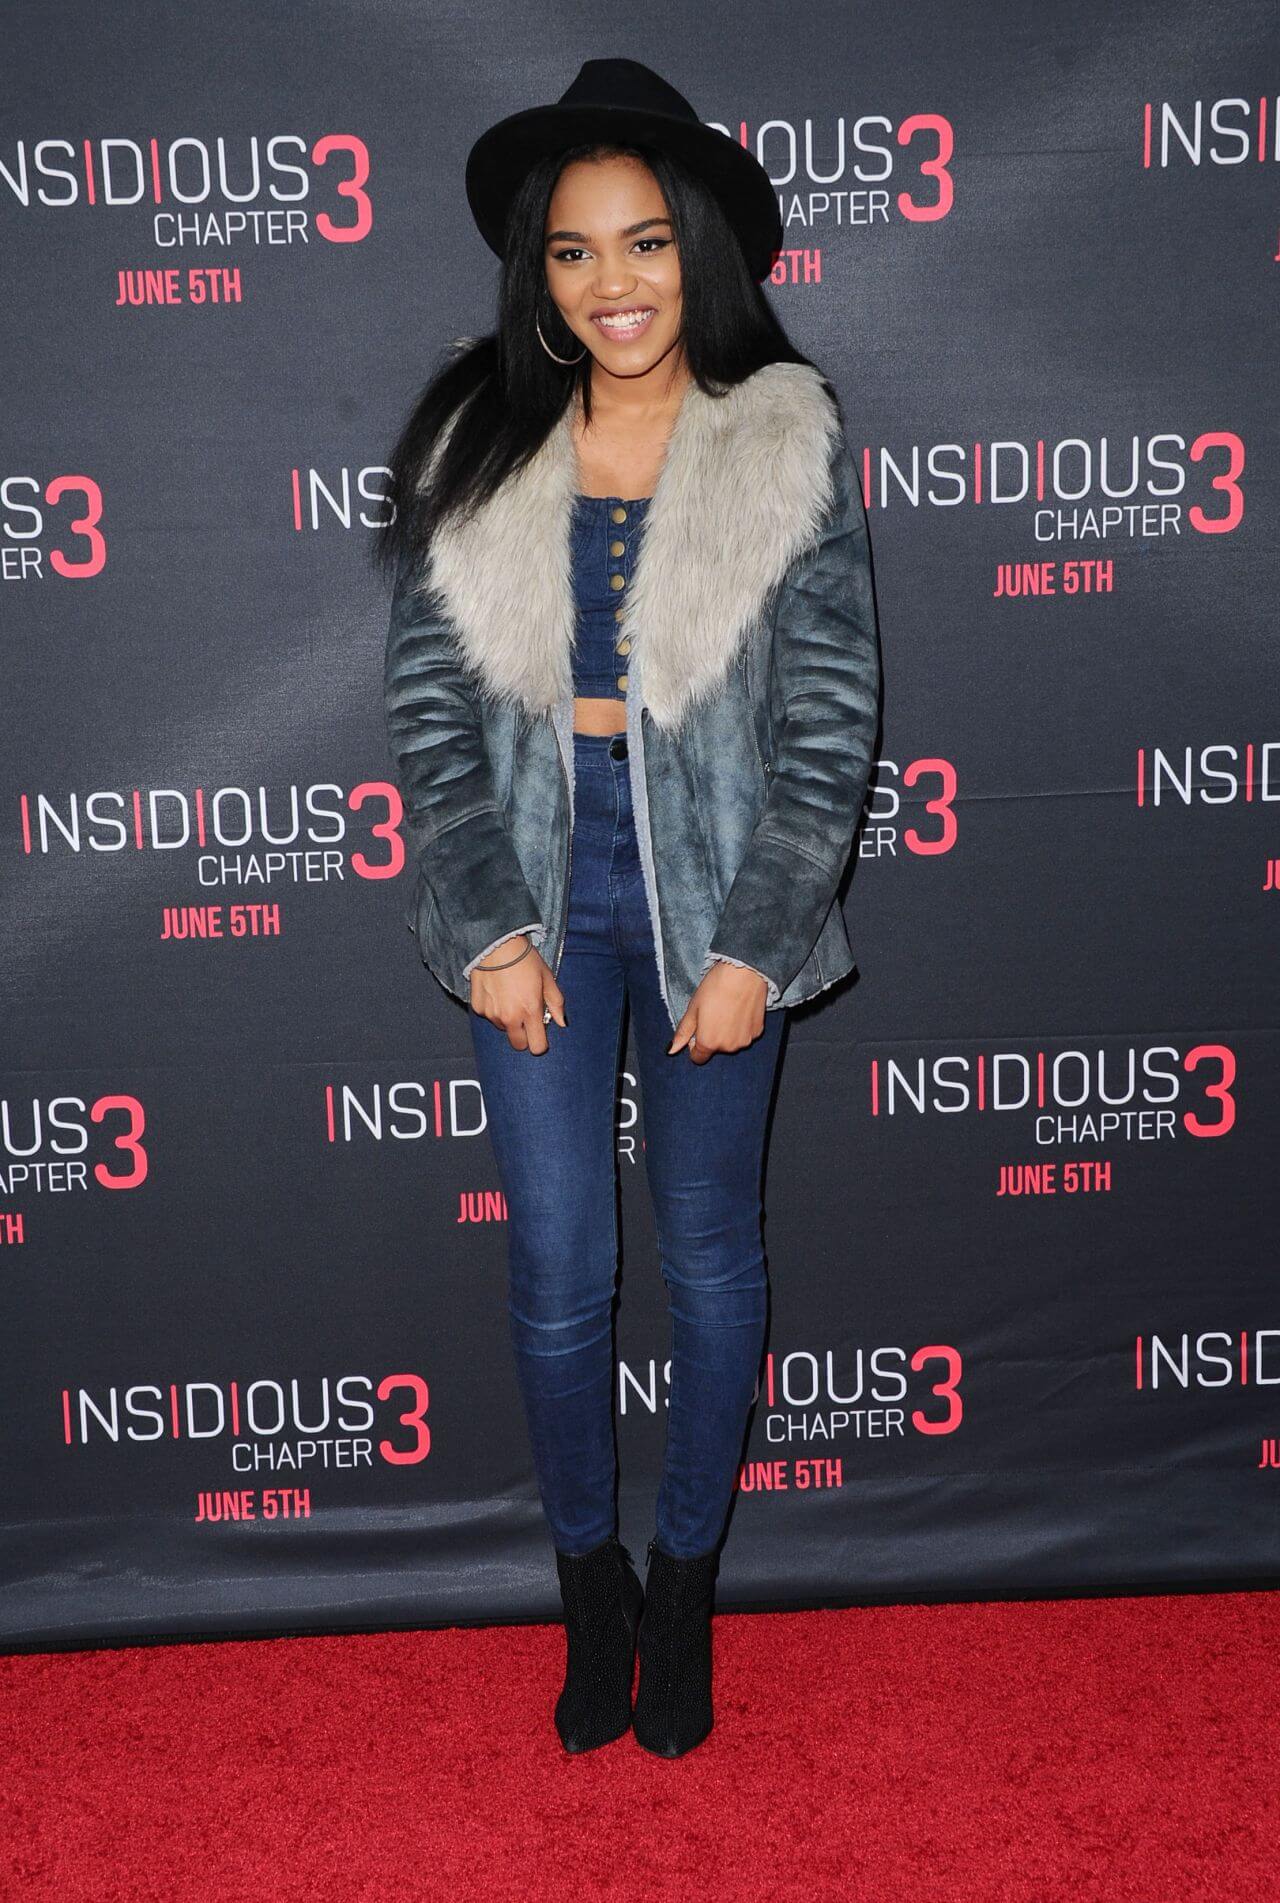 China Anne McClain In Grey Fur Style Jacket under Denim Dress At‘Insidious: Chapter 3’ Premiere in Hollywood